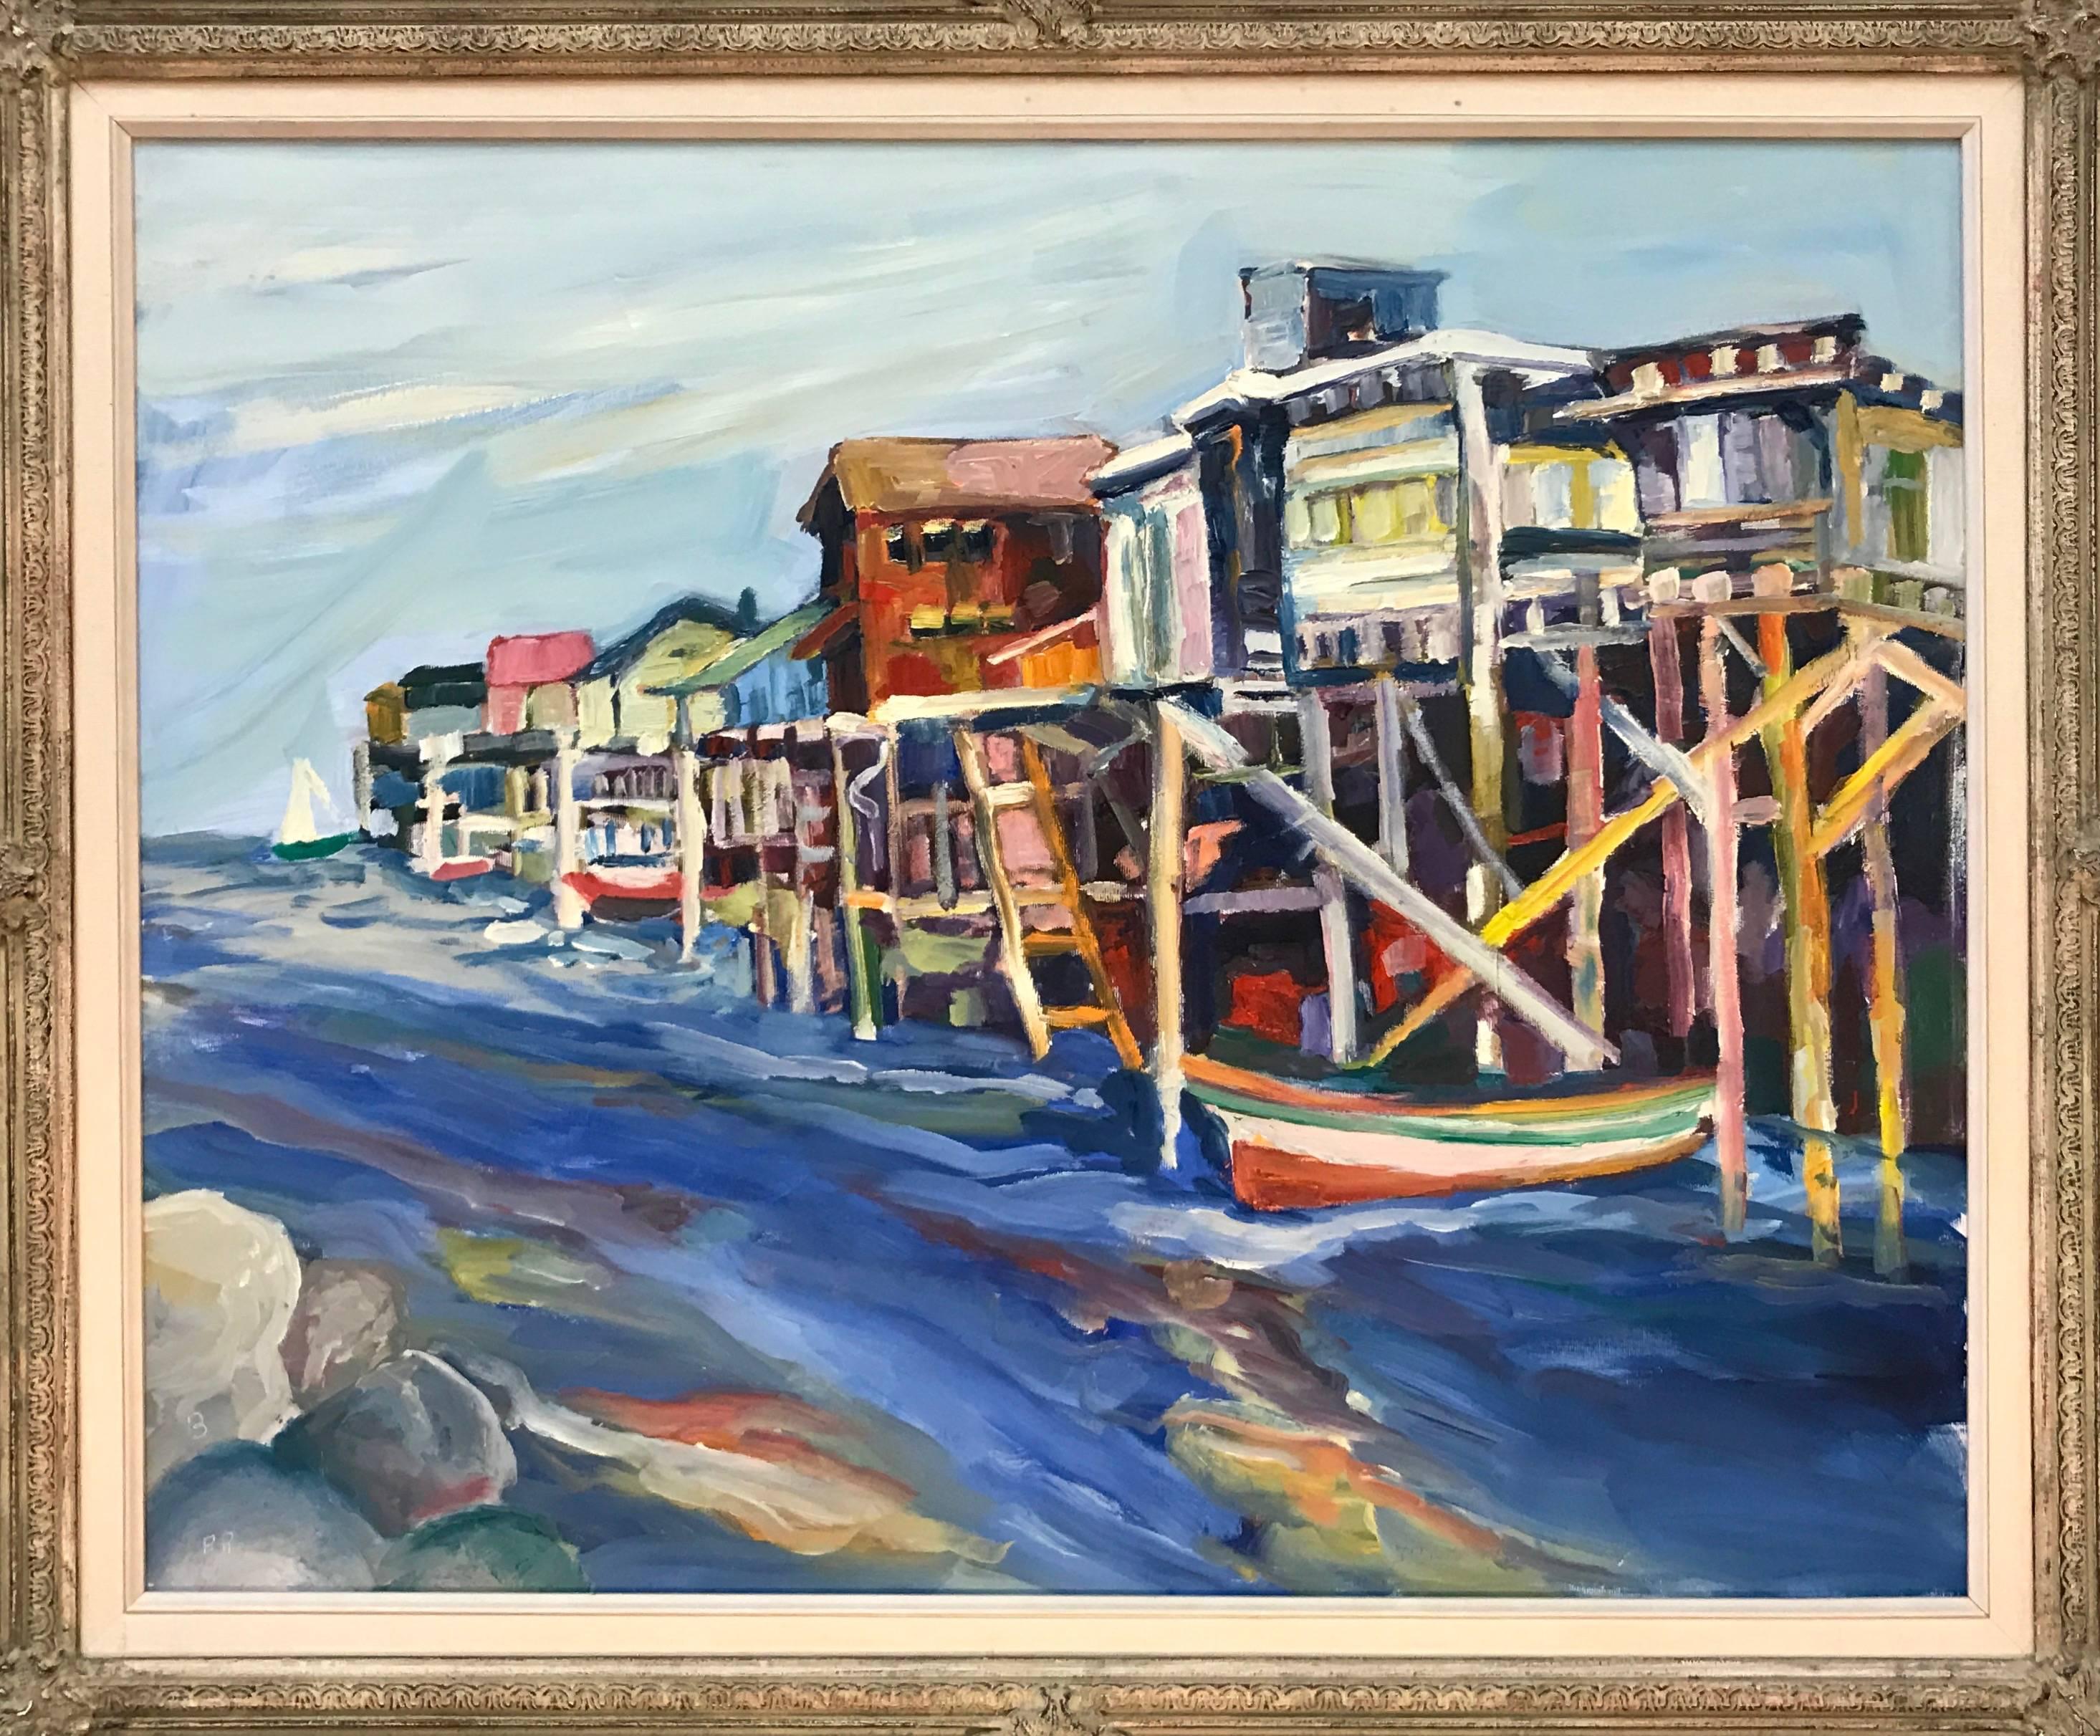 A figurative oil painting on canvas titled “View of Cannery Row” by California artist Jane Bradford (1923-2012).

Jane Bradford was a prolific and widely exhibited American painter primarily known for her post-impressionist interpretations of